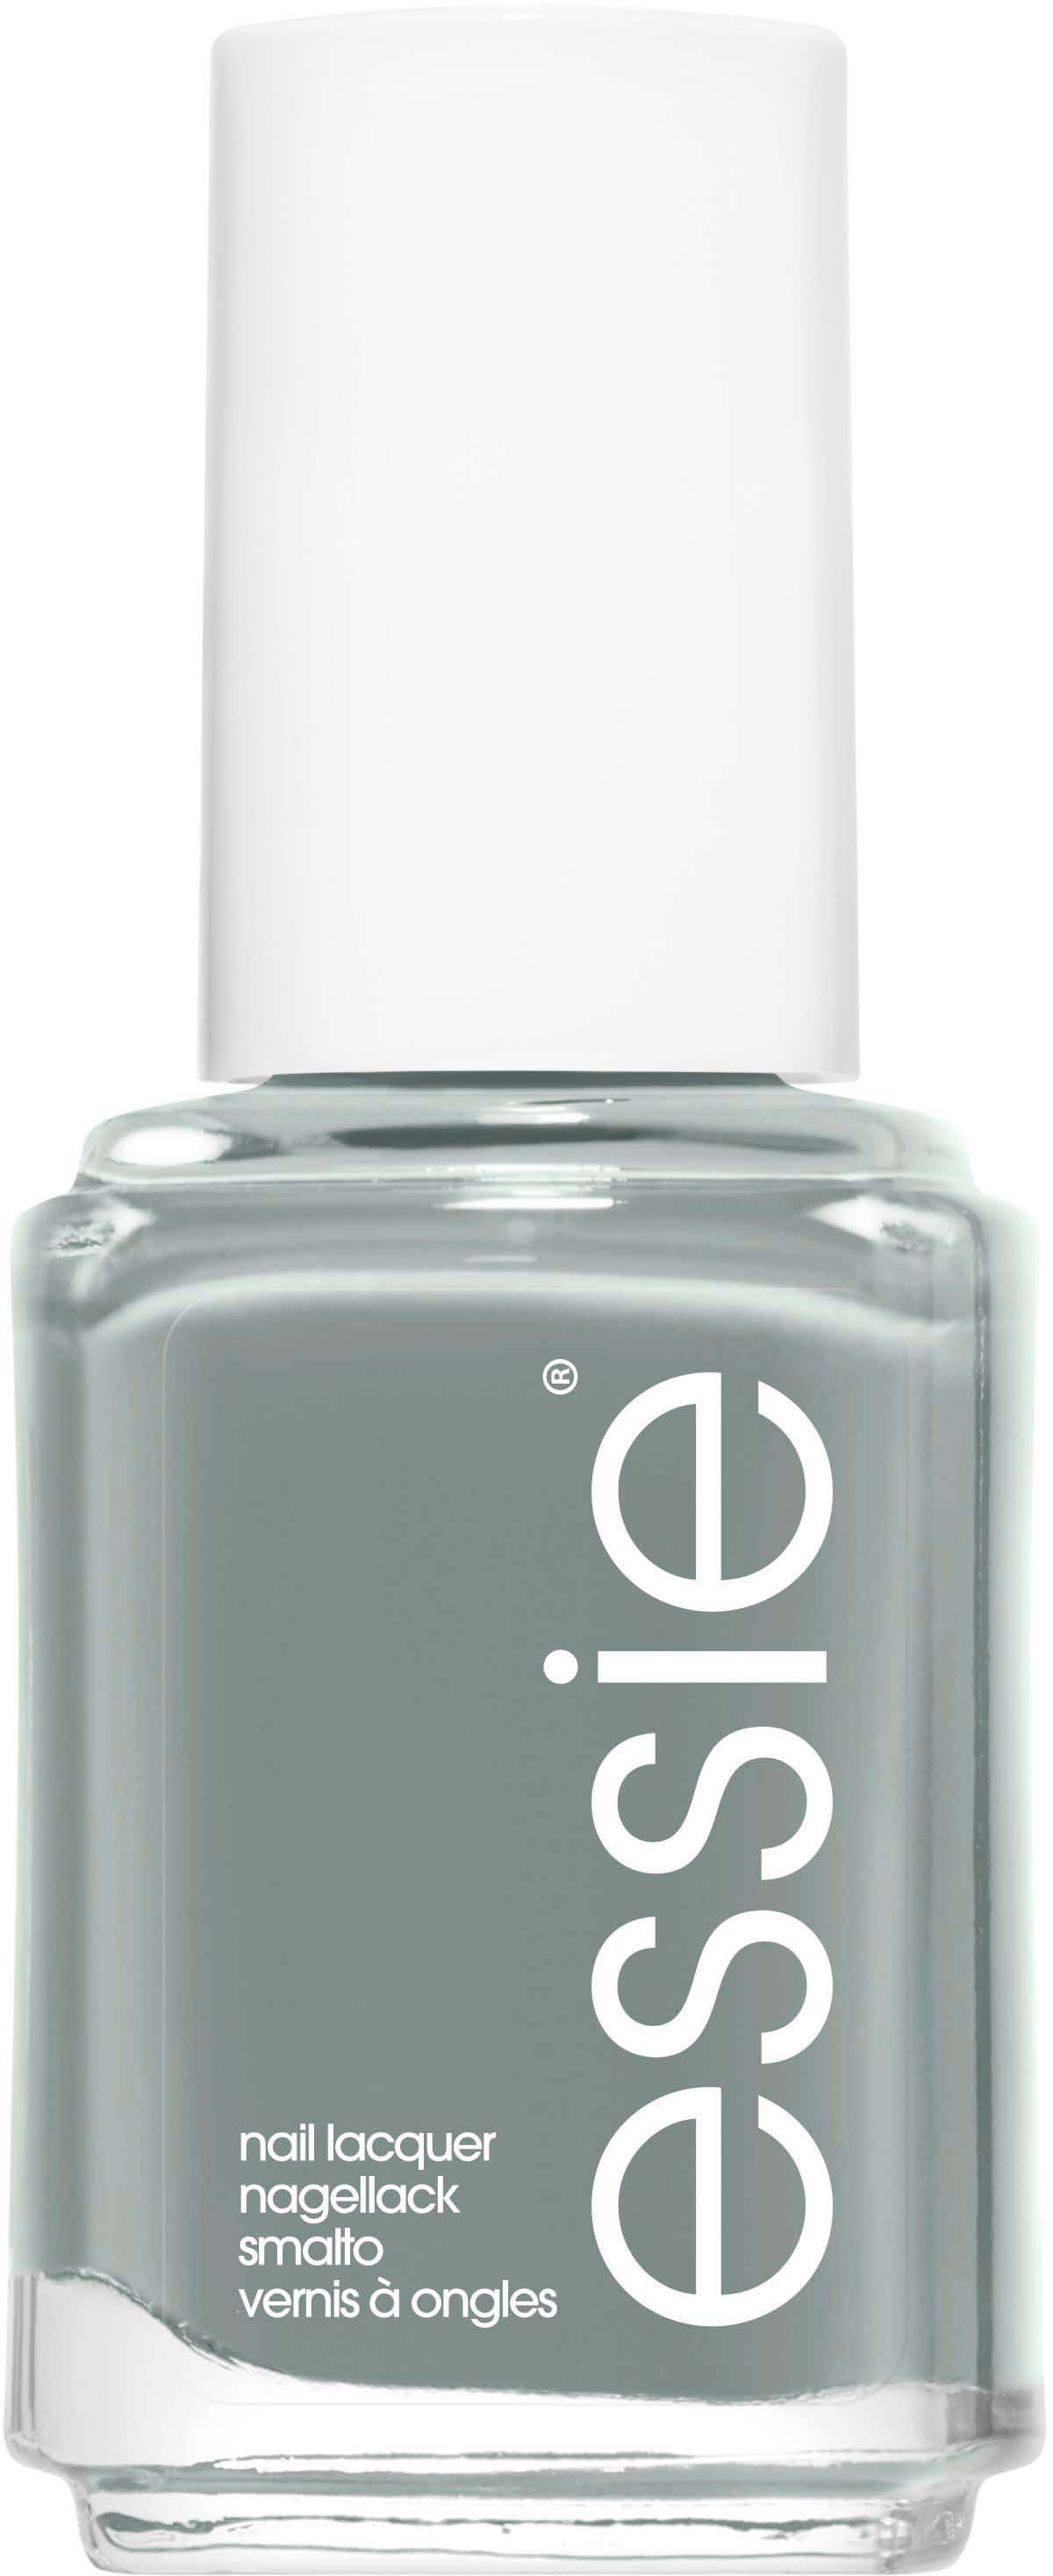 252 Maximillian Essie Nail Strasse Lacquer Her